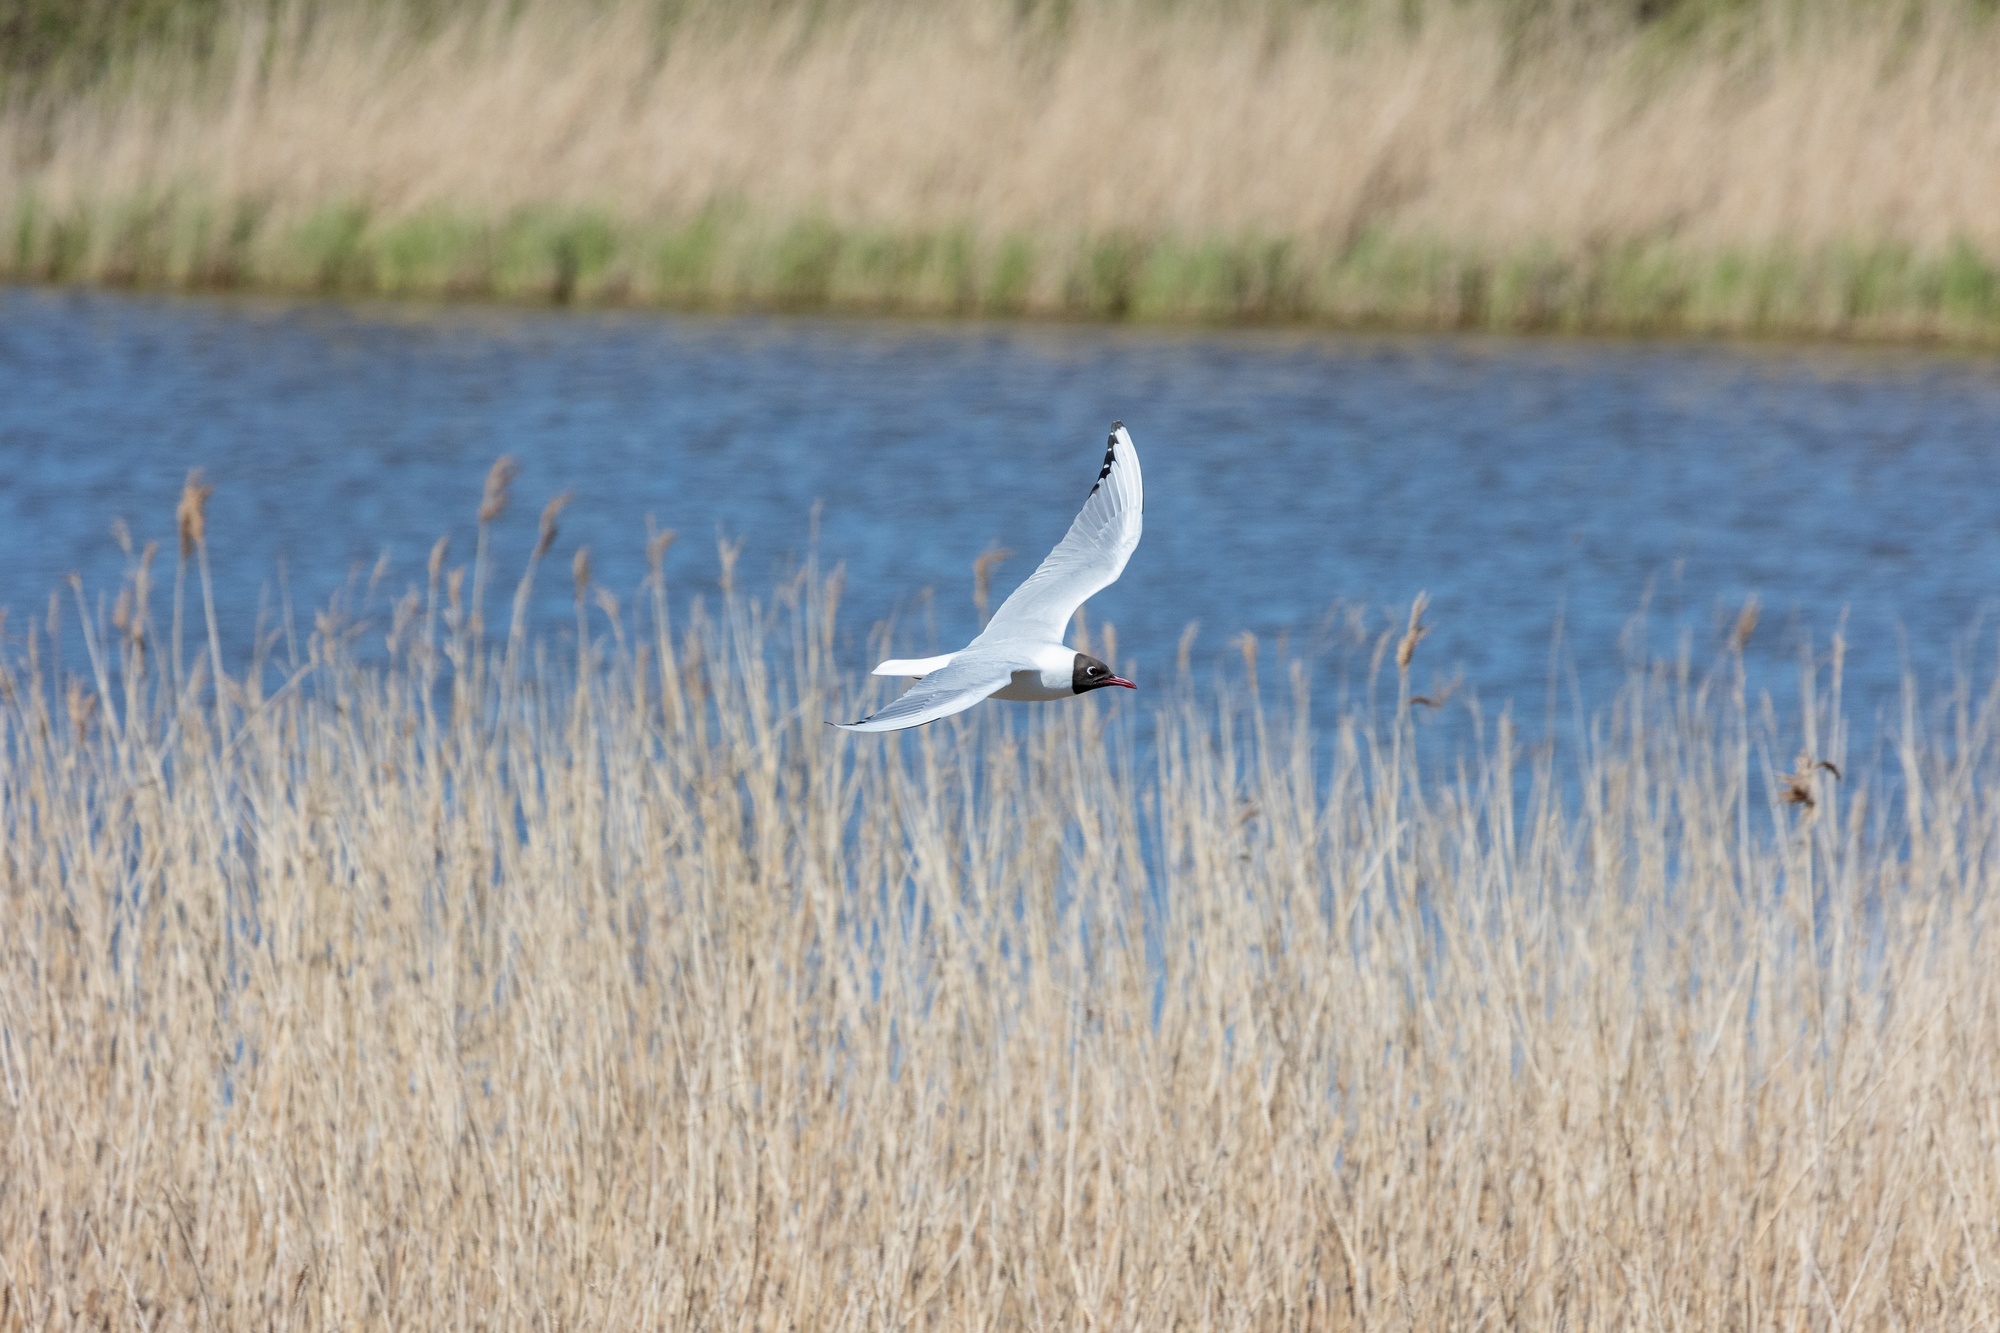 Black-headed Gull flying infront of pond and tall yellow grass